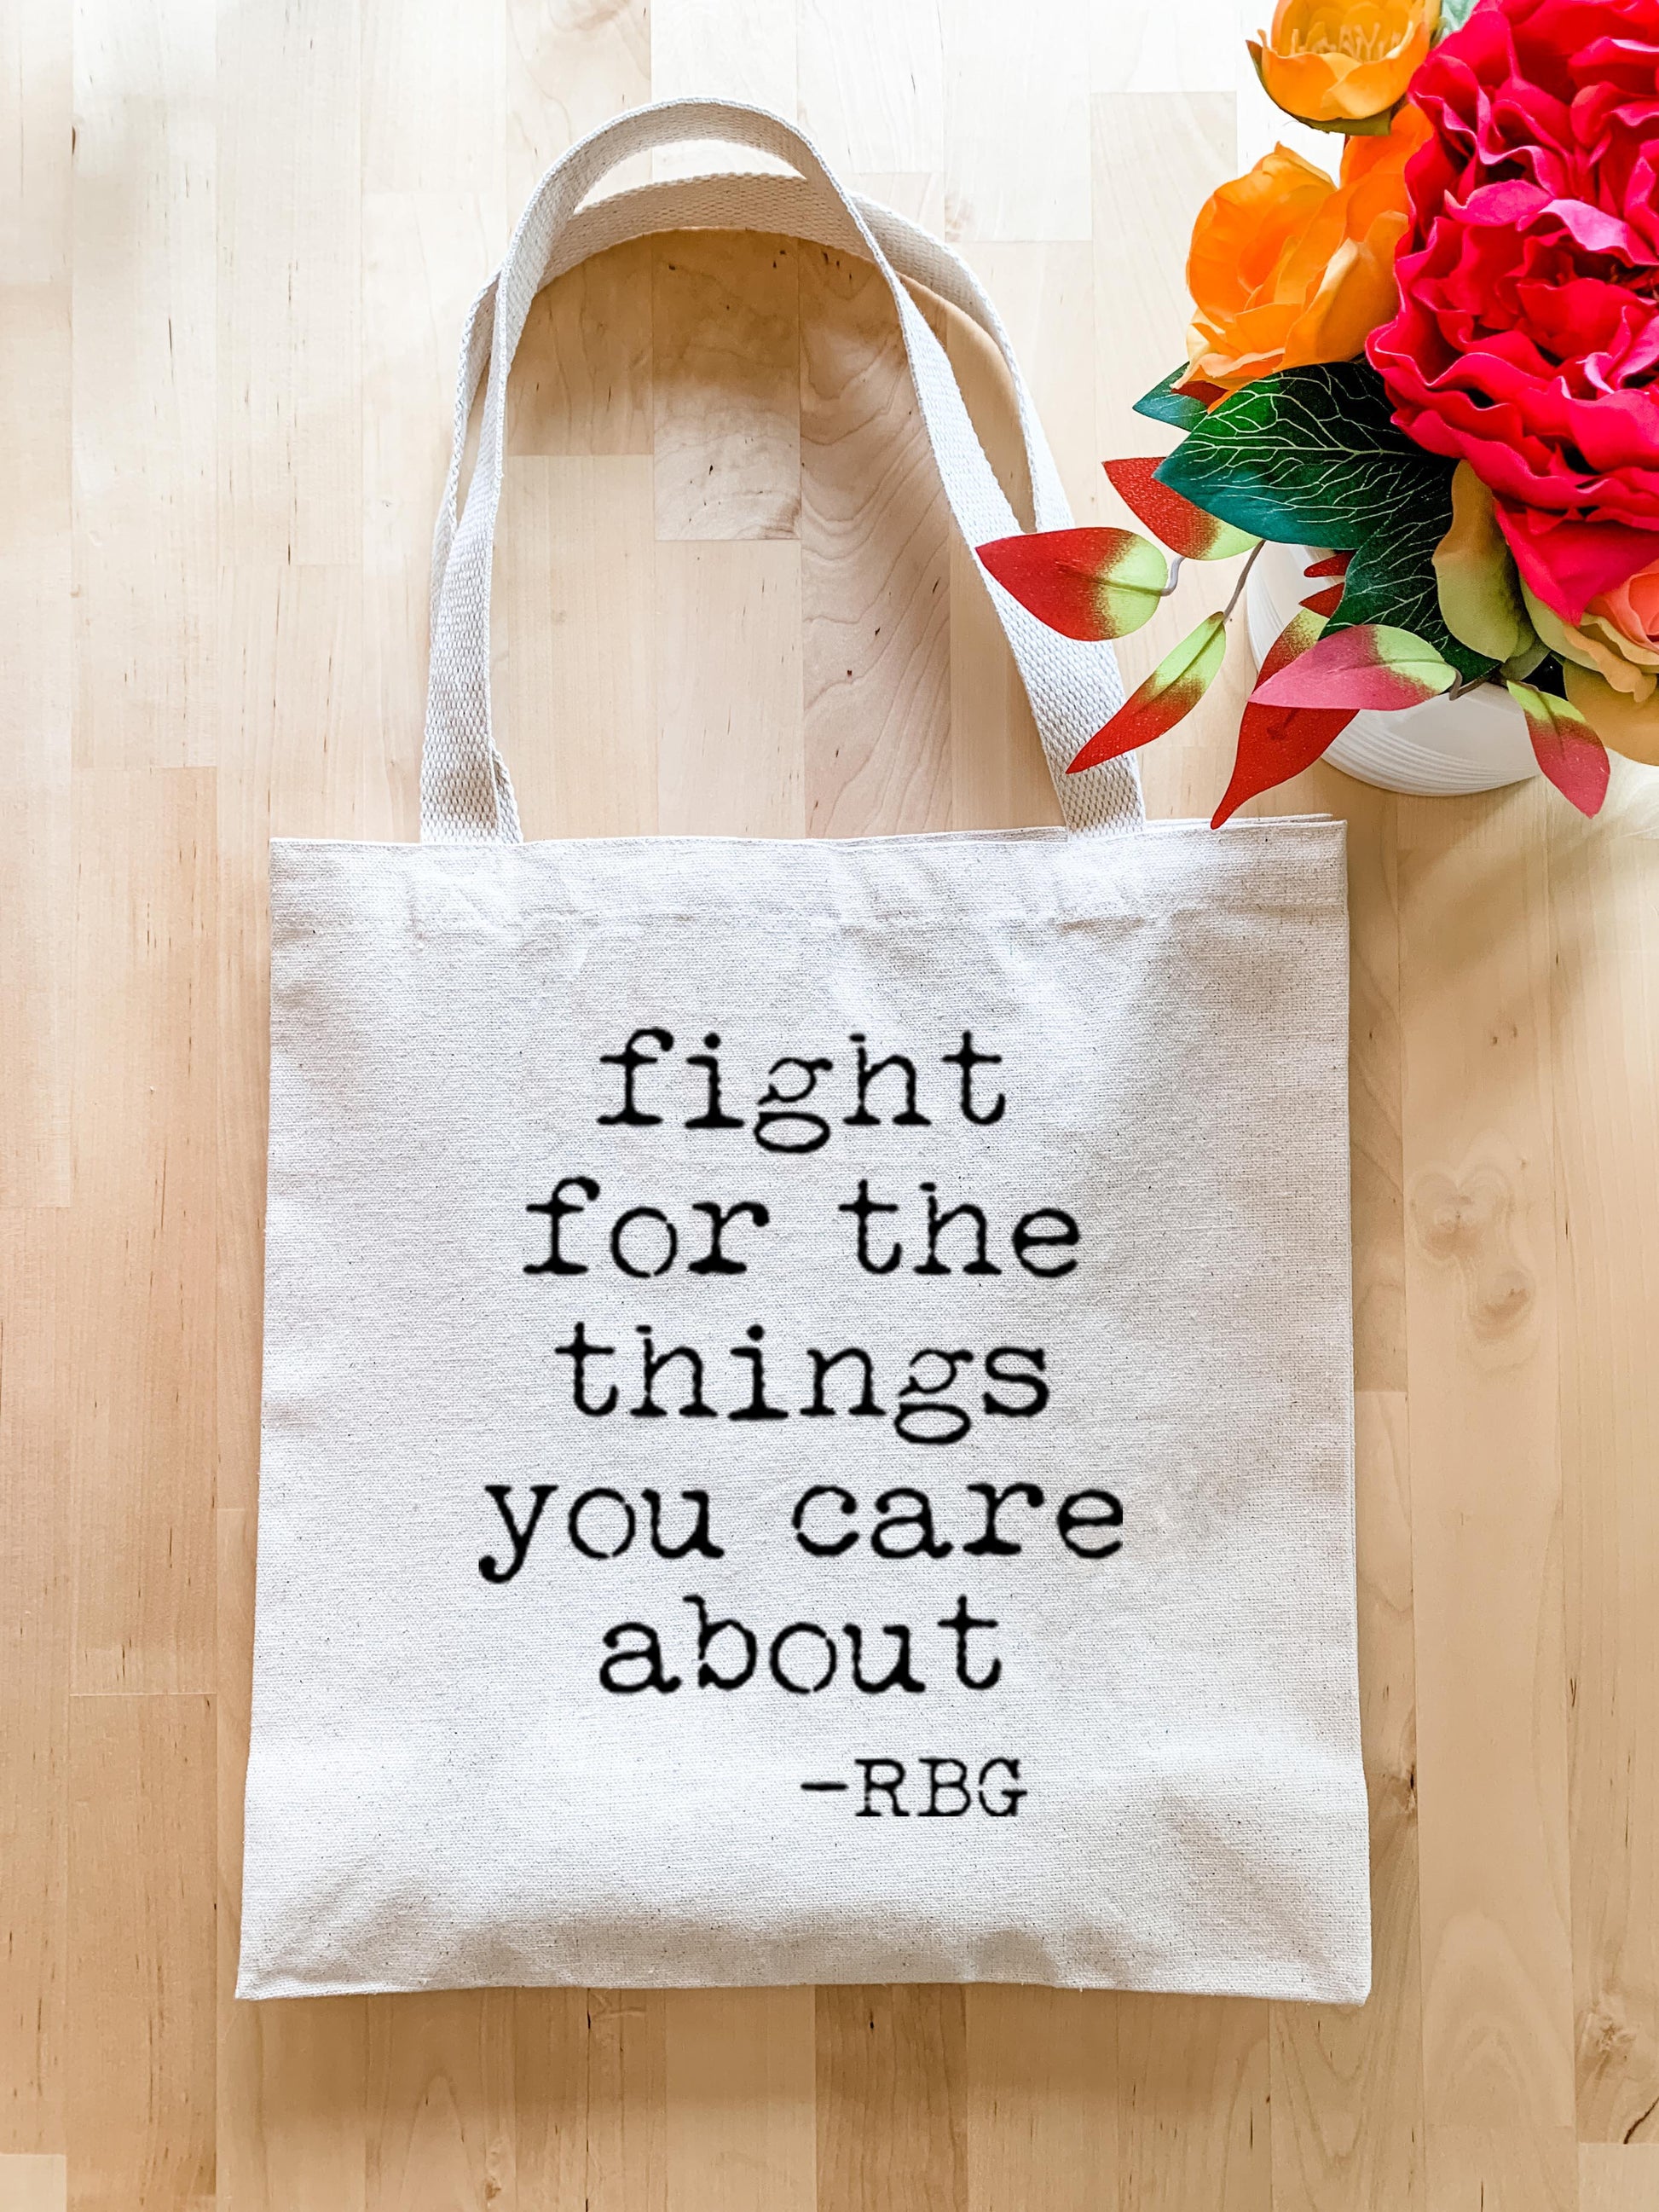 Fight For The Things You Care About (RBG) - Tote Bag - MoonlightMakers